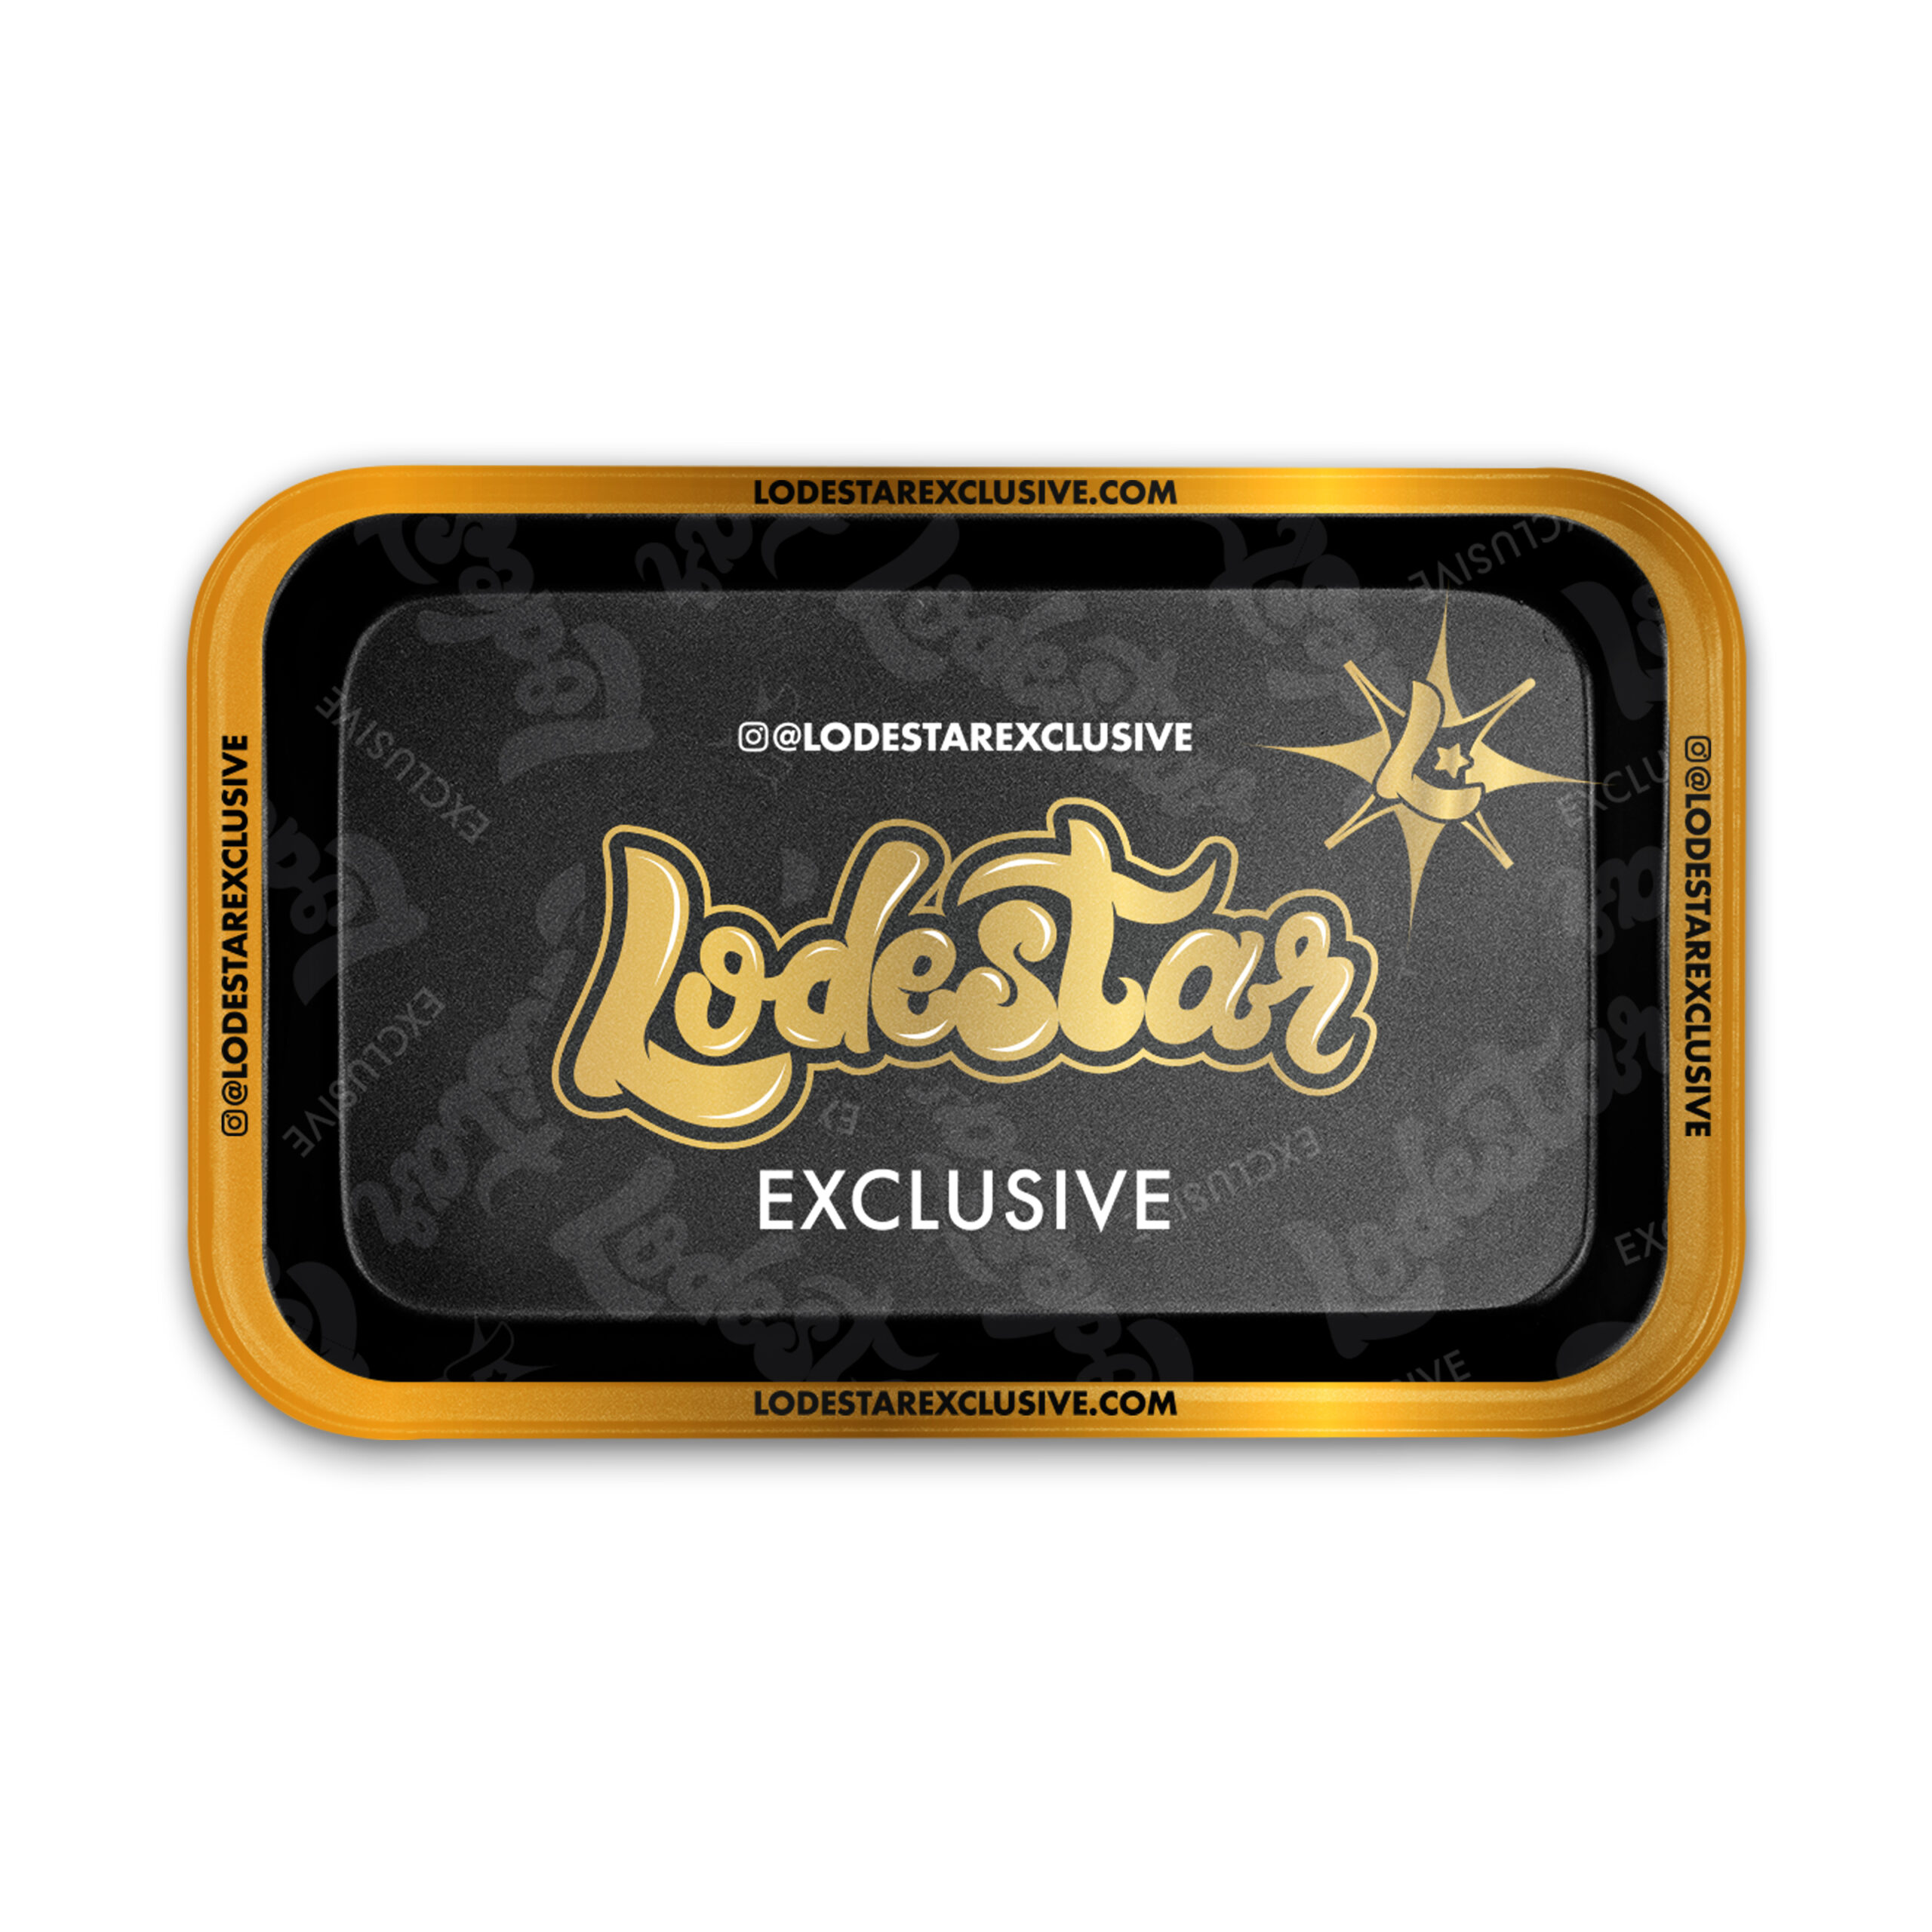 Lodestar Exclusive Rolling Tray Product Photo